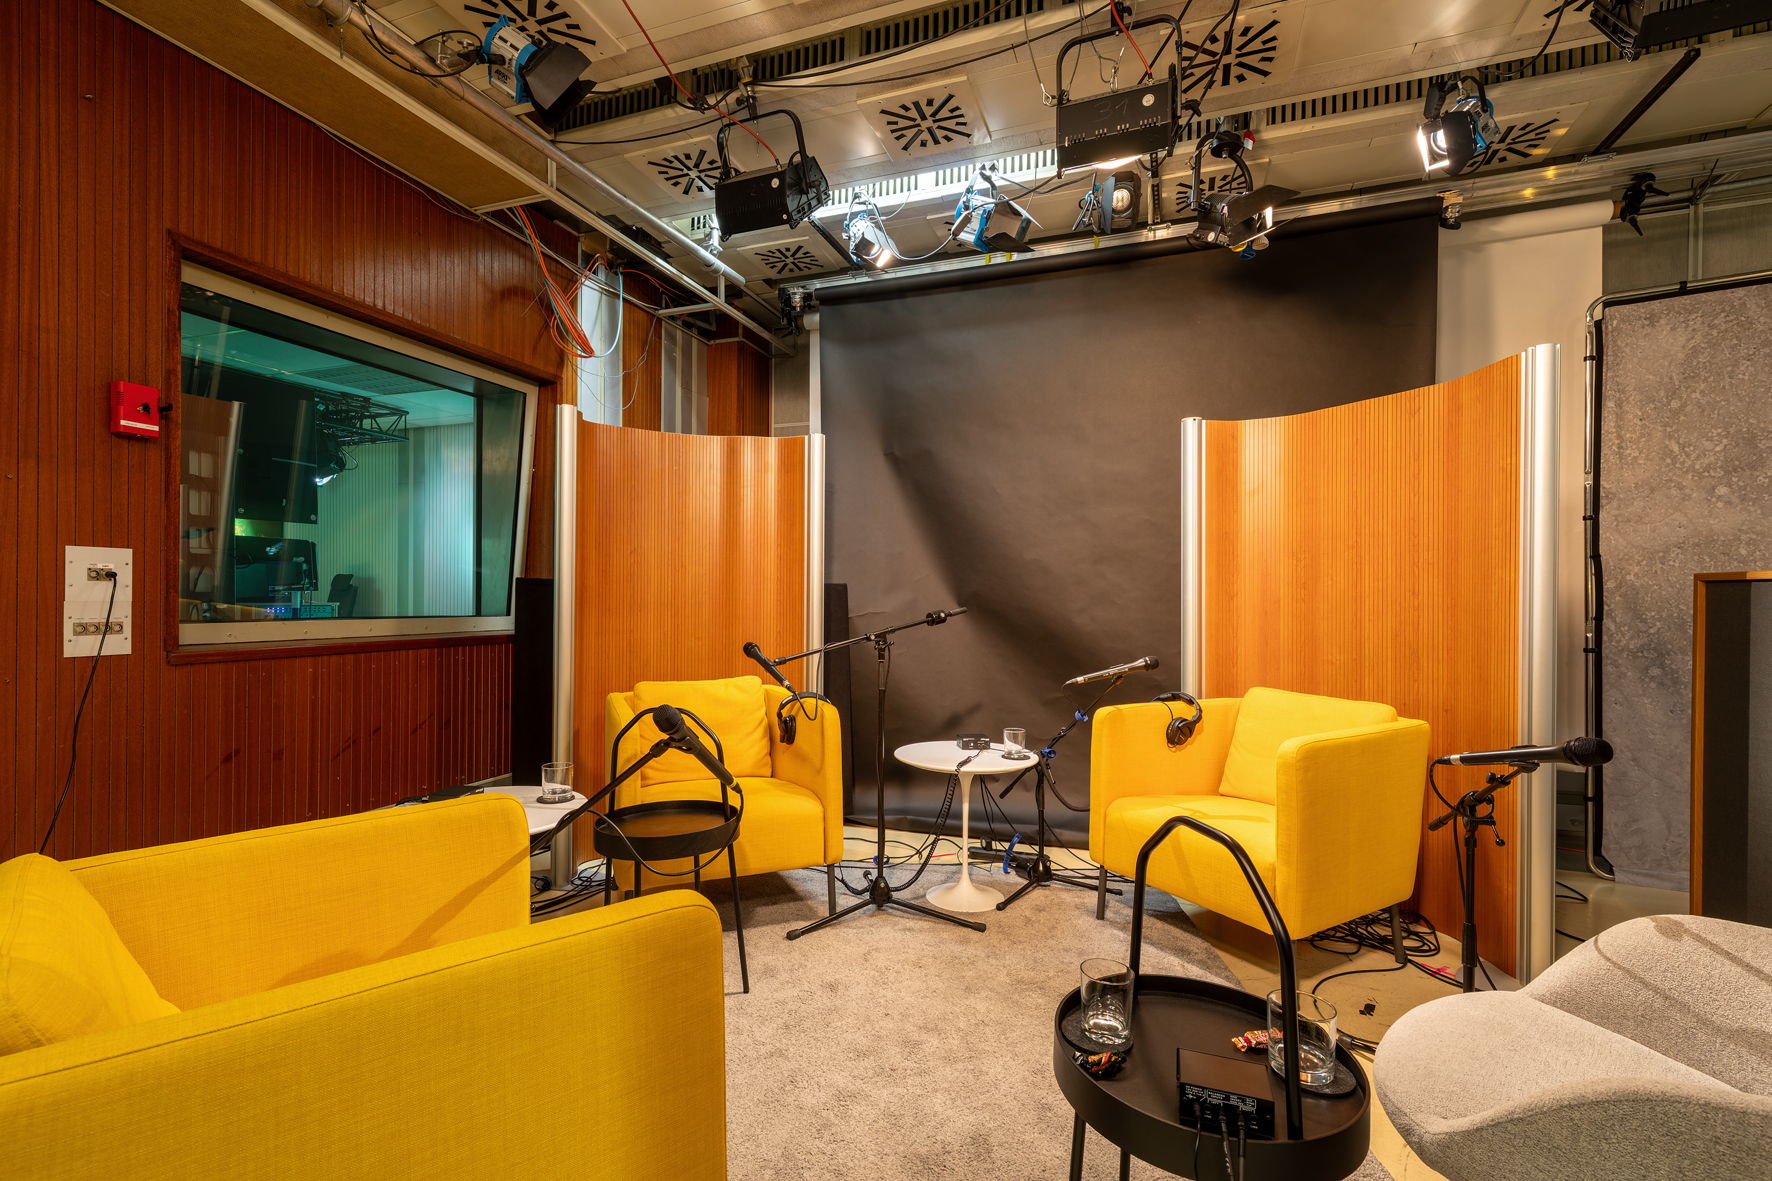 The recording studio has a relaxing atmosphere